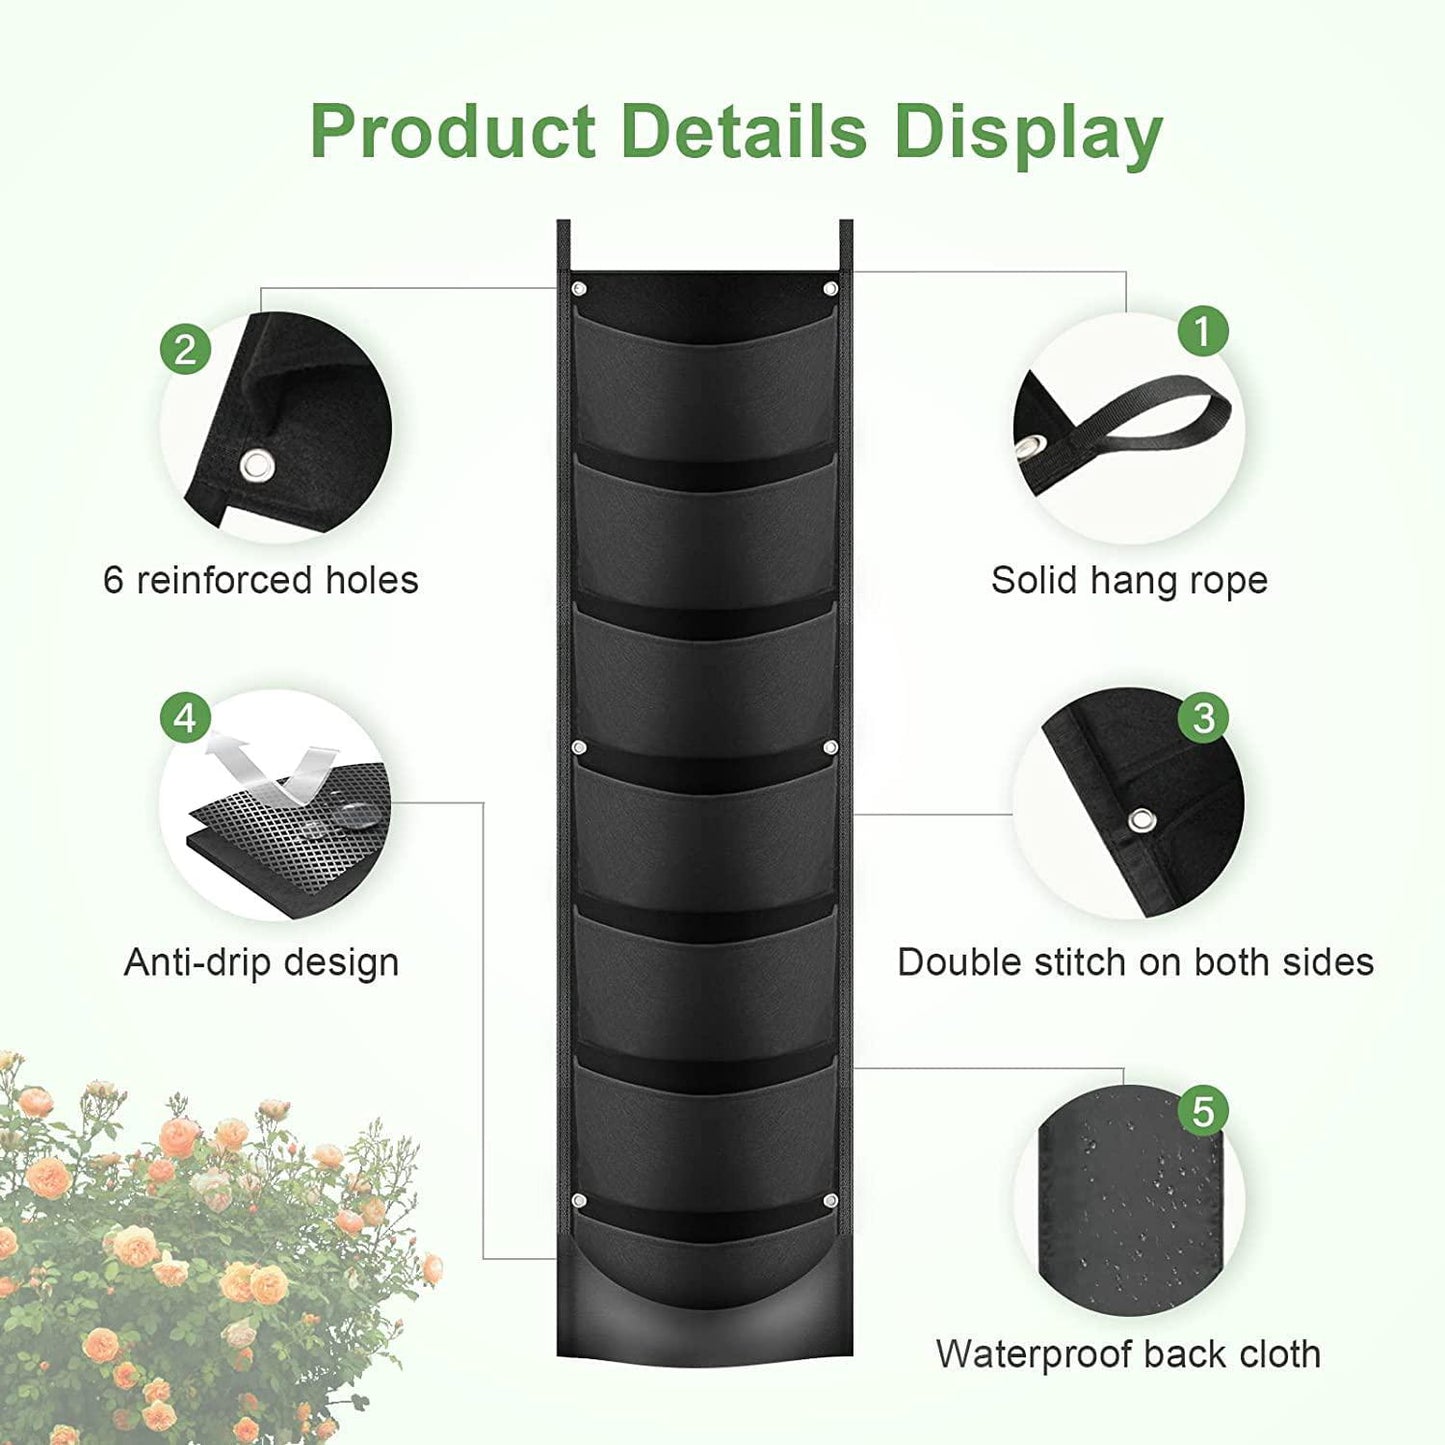 iPower 2-Pack Hanging Vertical Wall Planter 7 Pockets Upgraded Deeper Waterproof Herb Flower Growing Pouch Felt Cloth, for Yard Garden Fence Home, Balcony Office Decoration